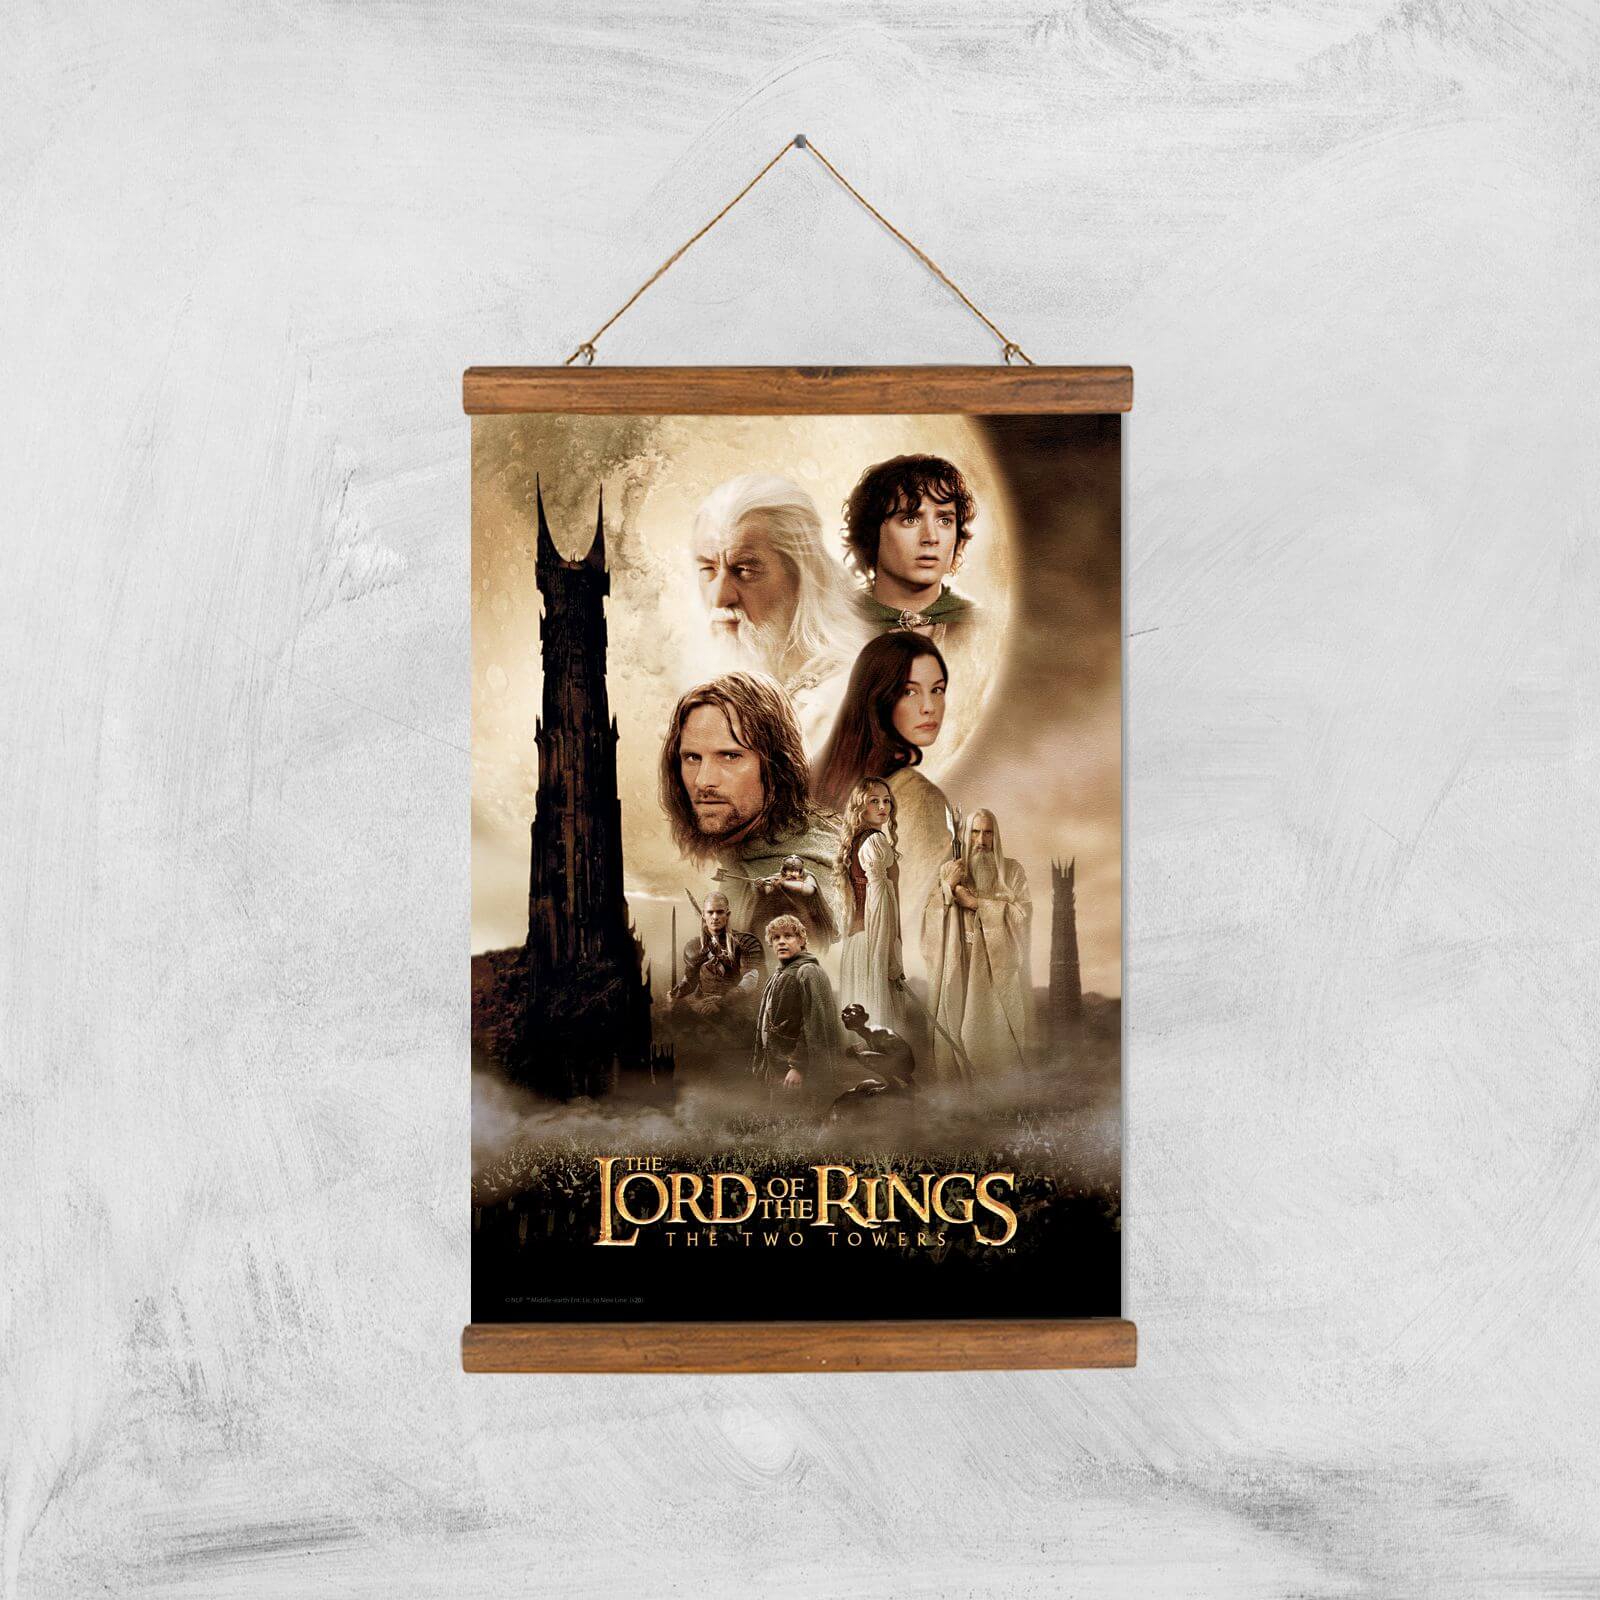 Lord Of The Rings: The Two Towers Giclee Art Print - A3 - Wooden Hanger